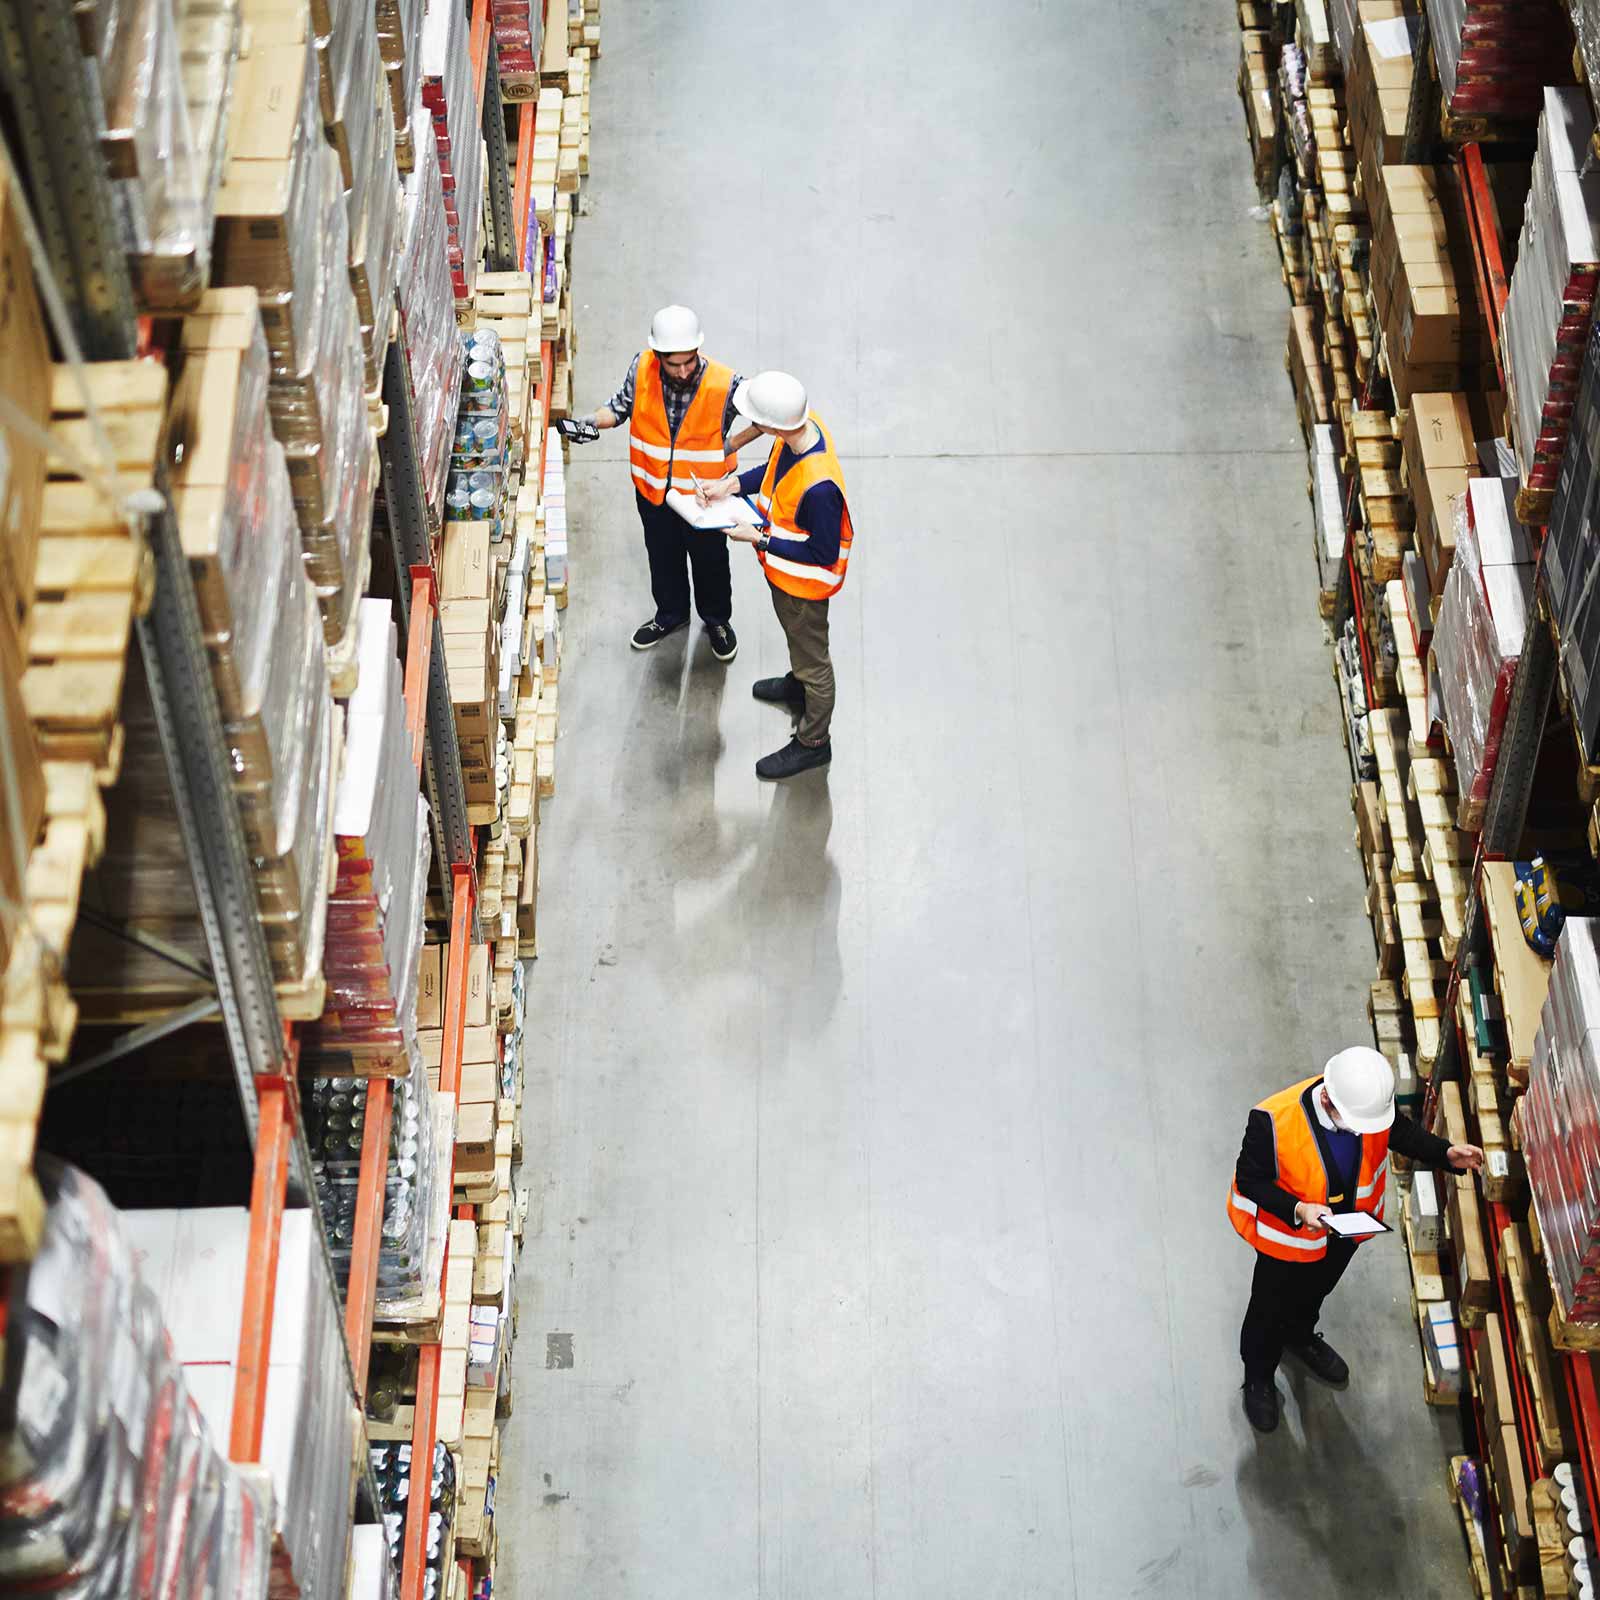 Workers performing a year-end inventory count in the warehouse